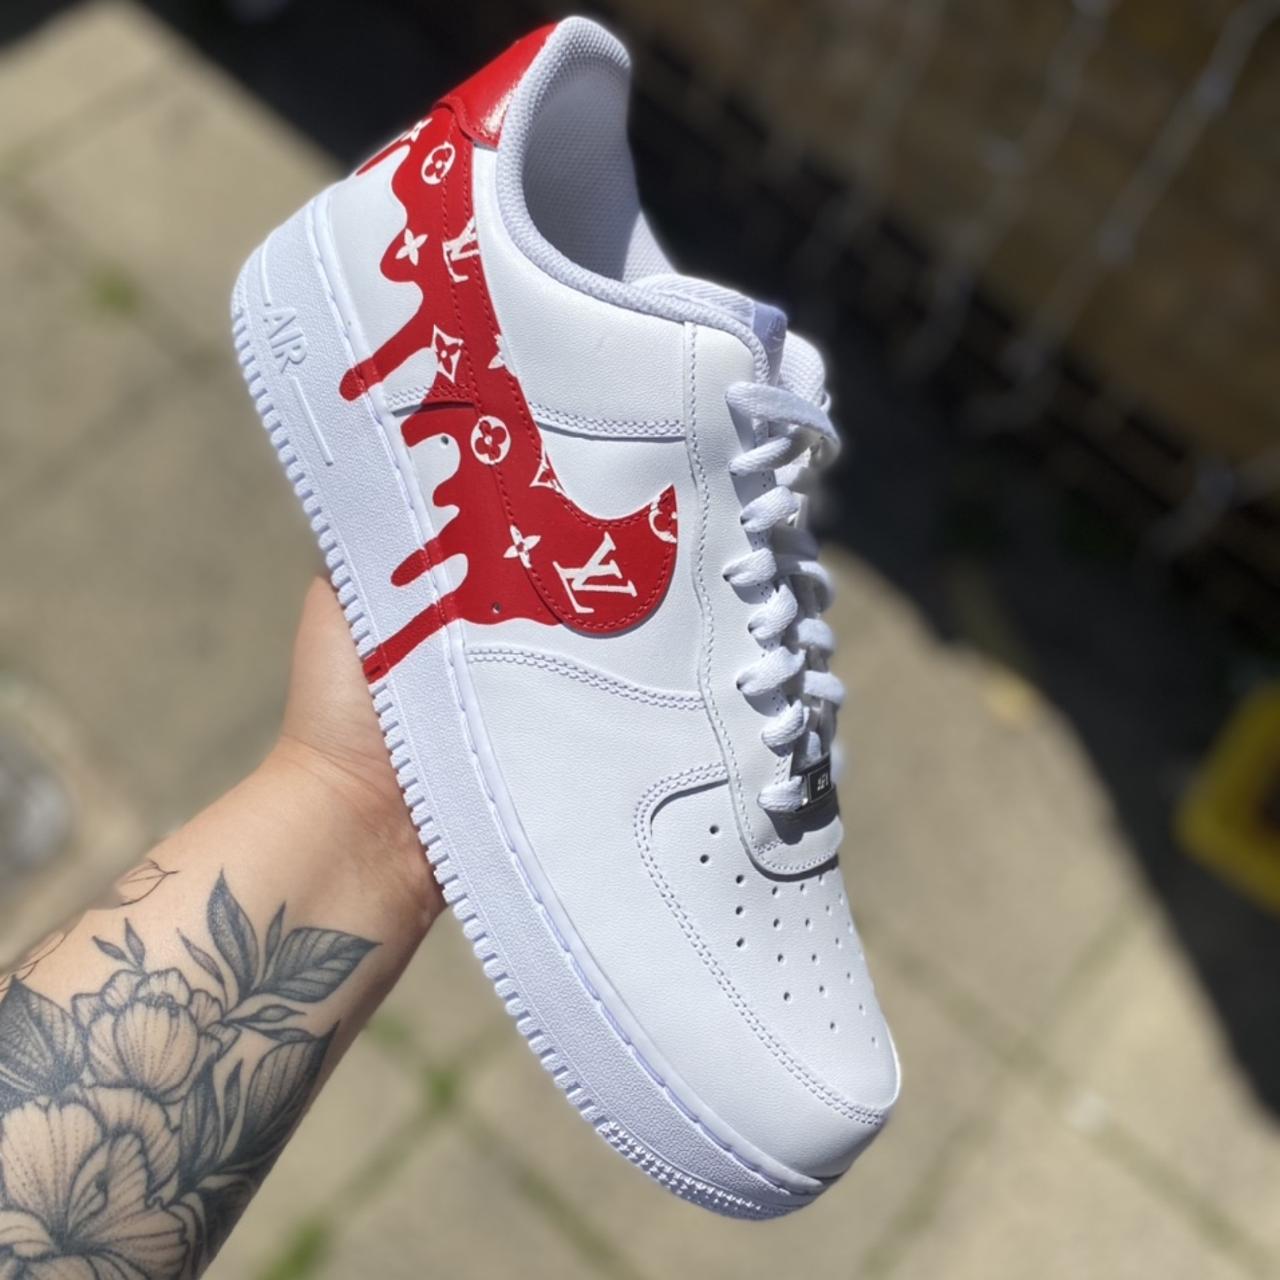 Dripping Red Louis Vuitton x Supreme Nike Air Force Ones, Custom shoes